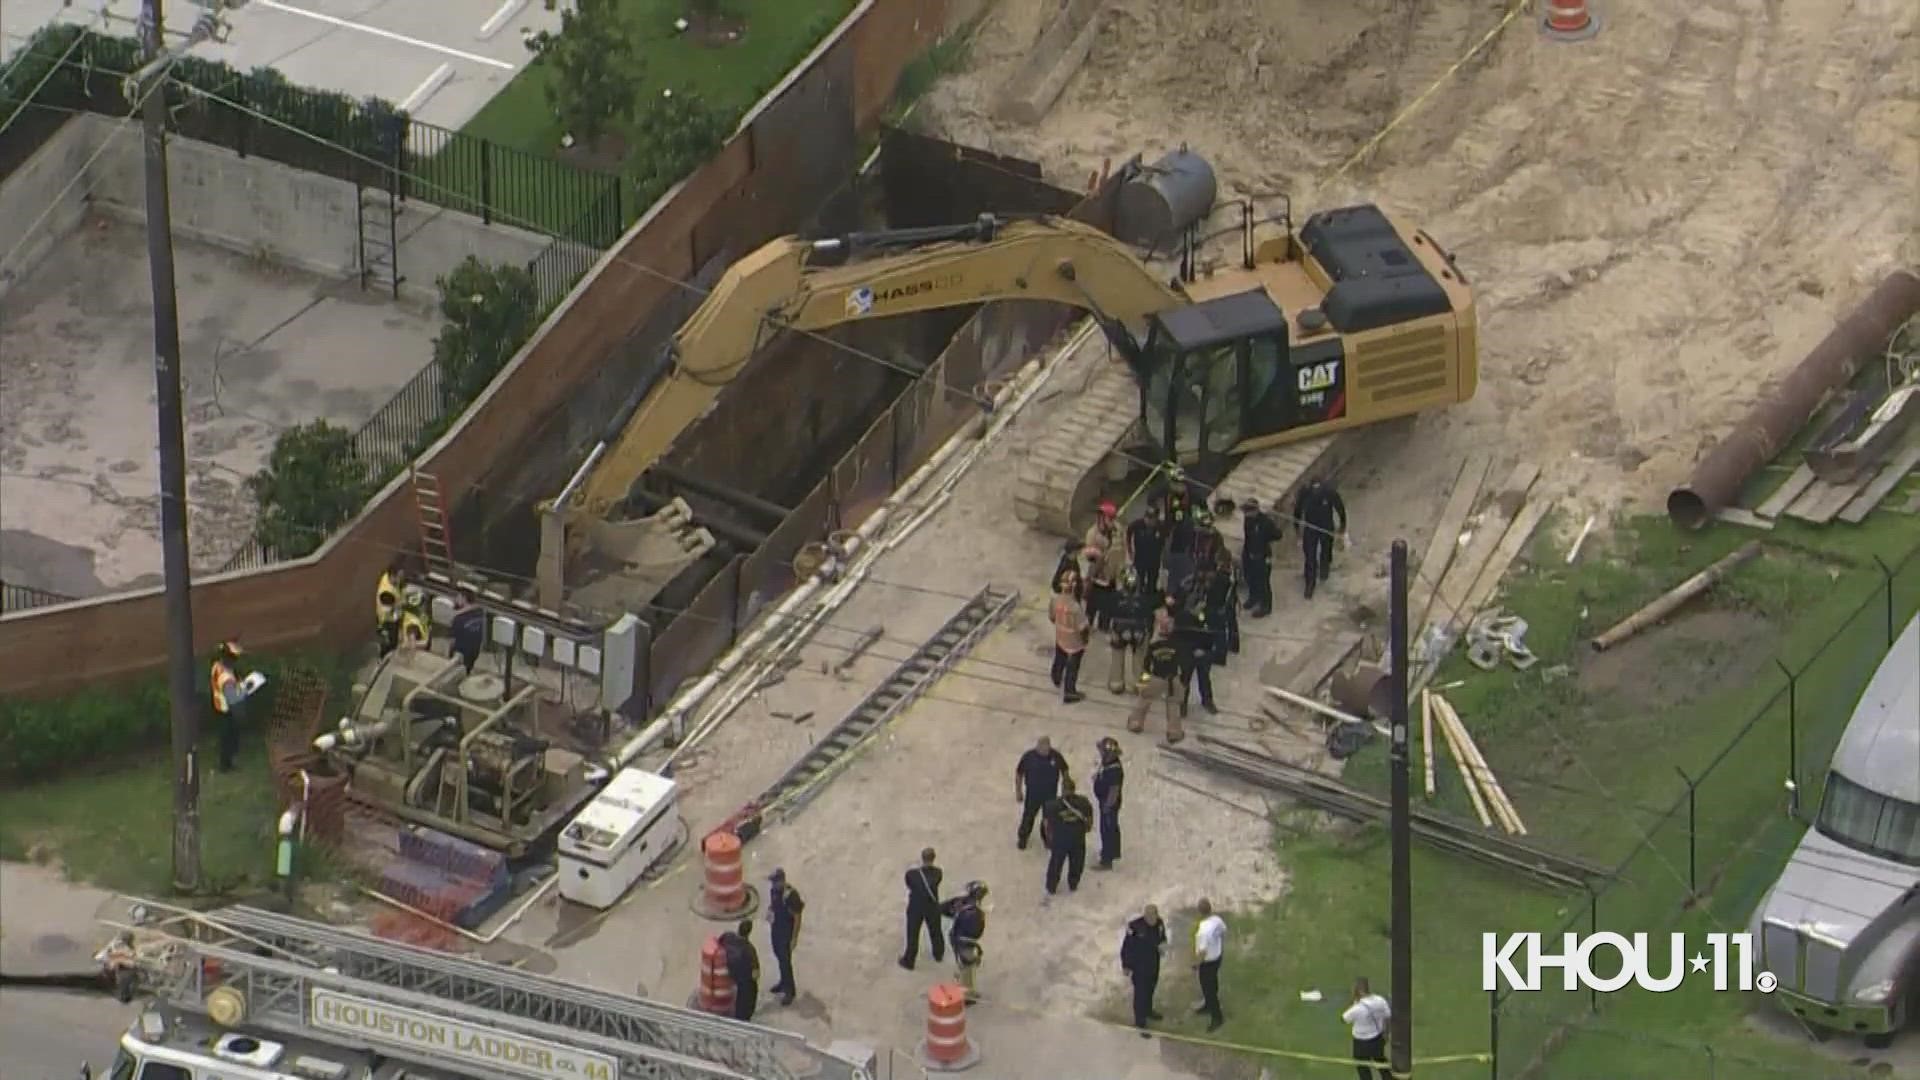 The initial call was for a trench rescue, but HFD crews later found the worker had died.